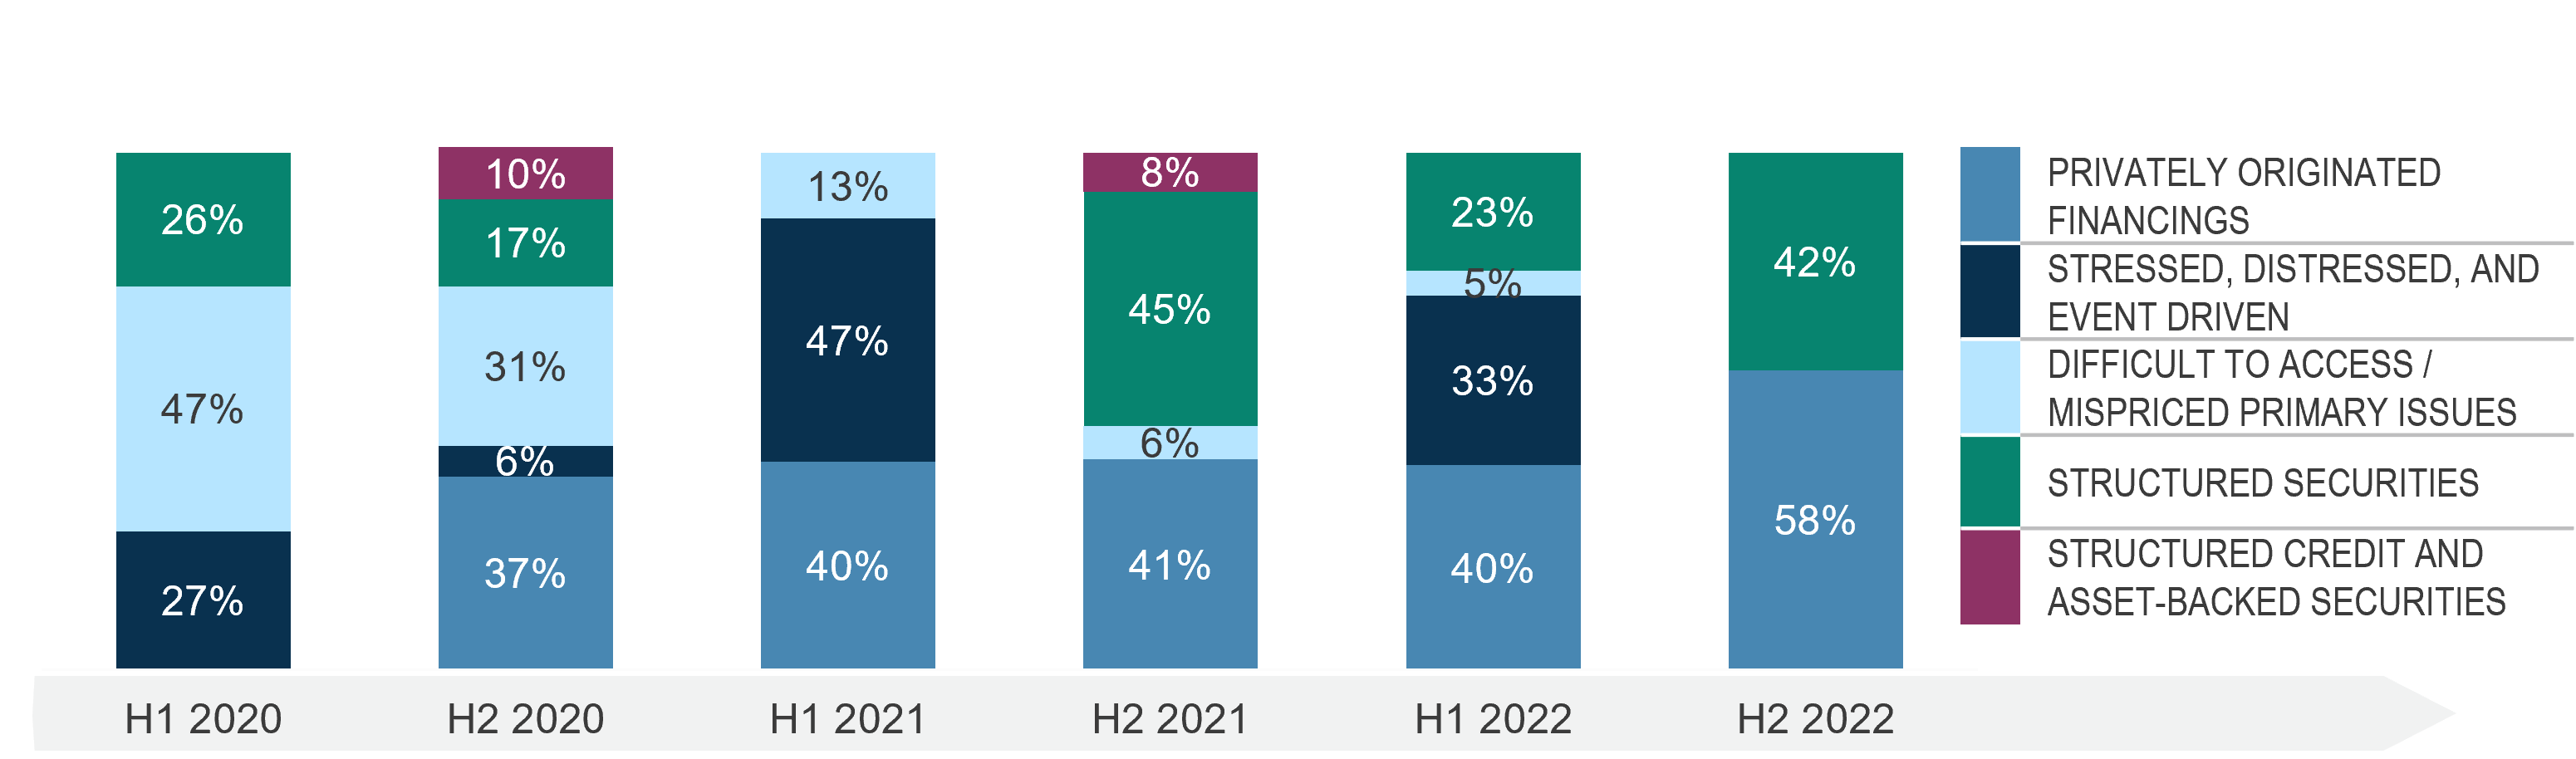 Private credit breakdown from 2020 through 2022.